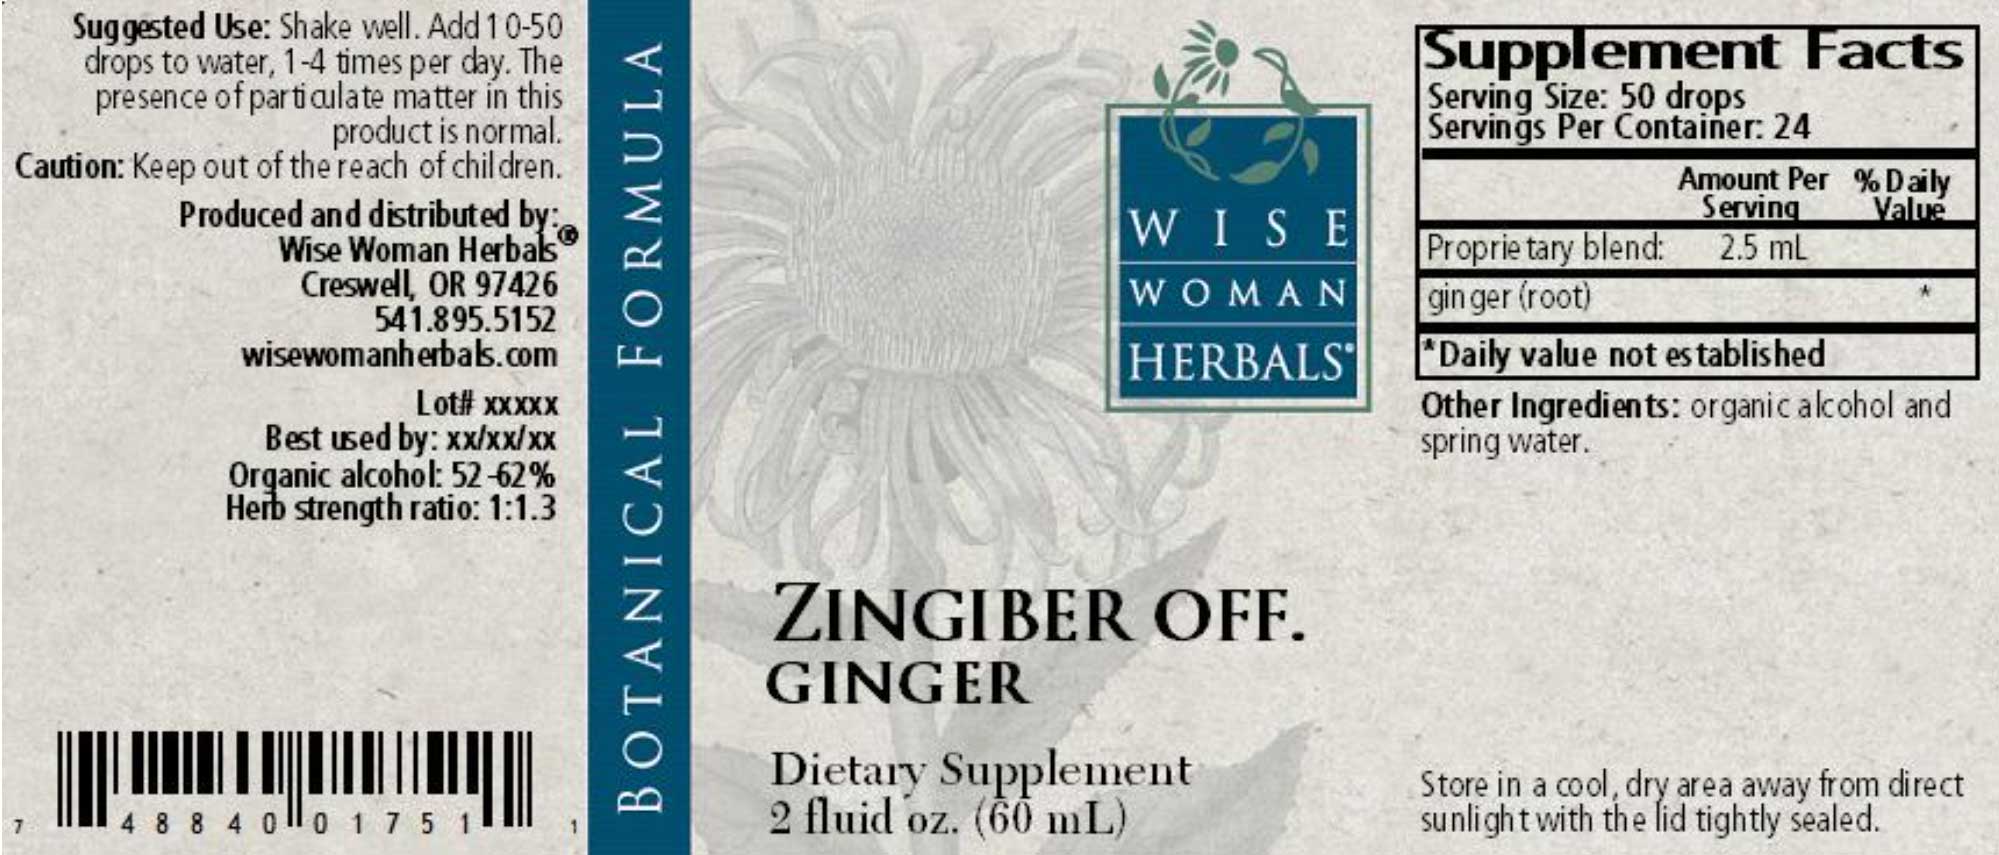 Wise Woman Herbals Zingiber Officinale Ginger Label